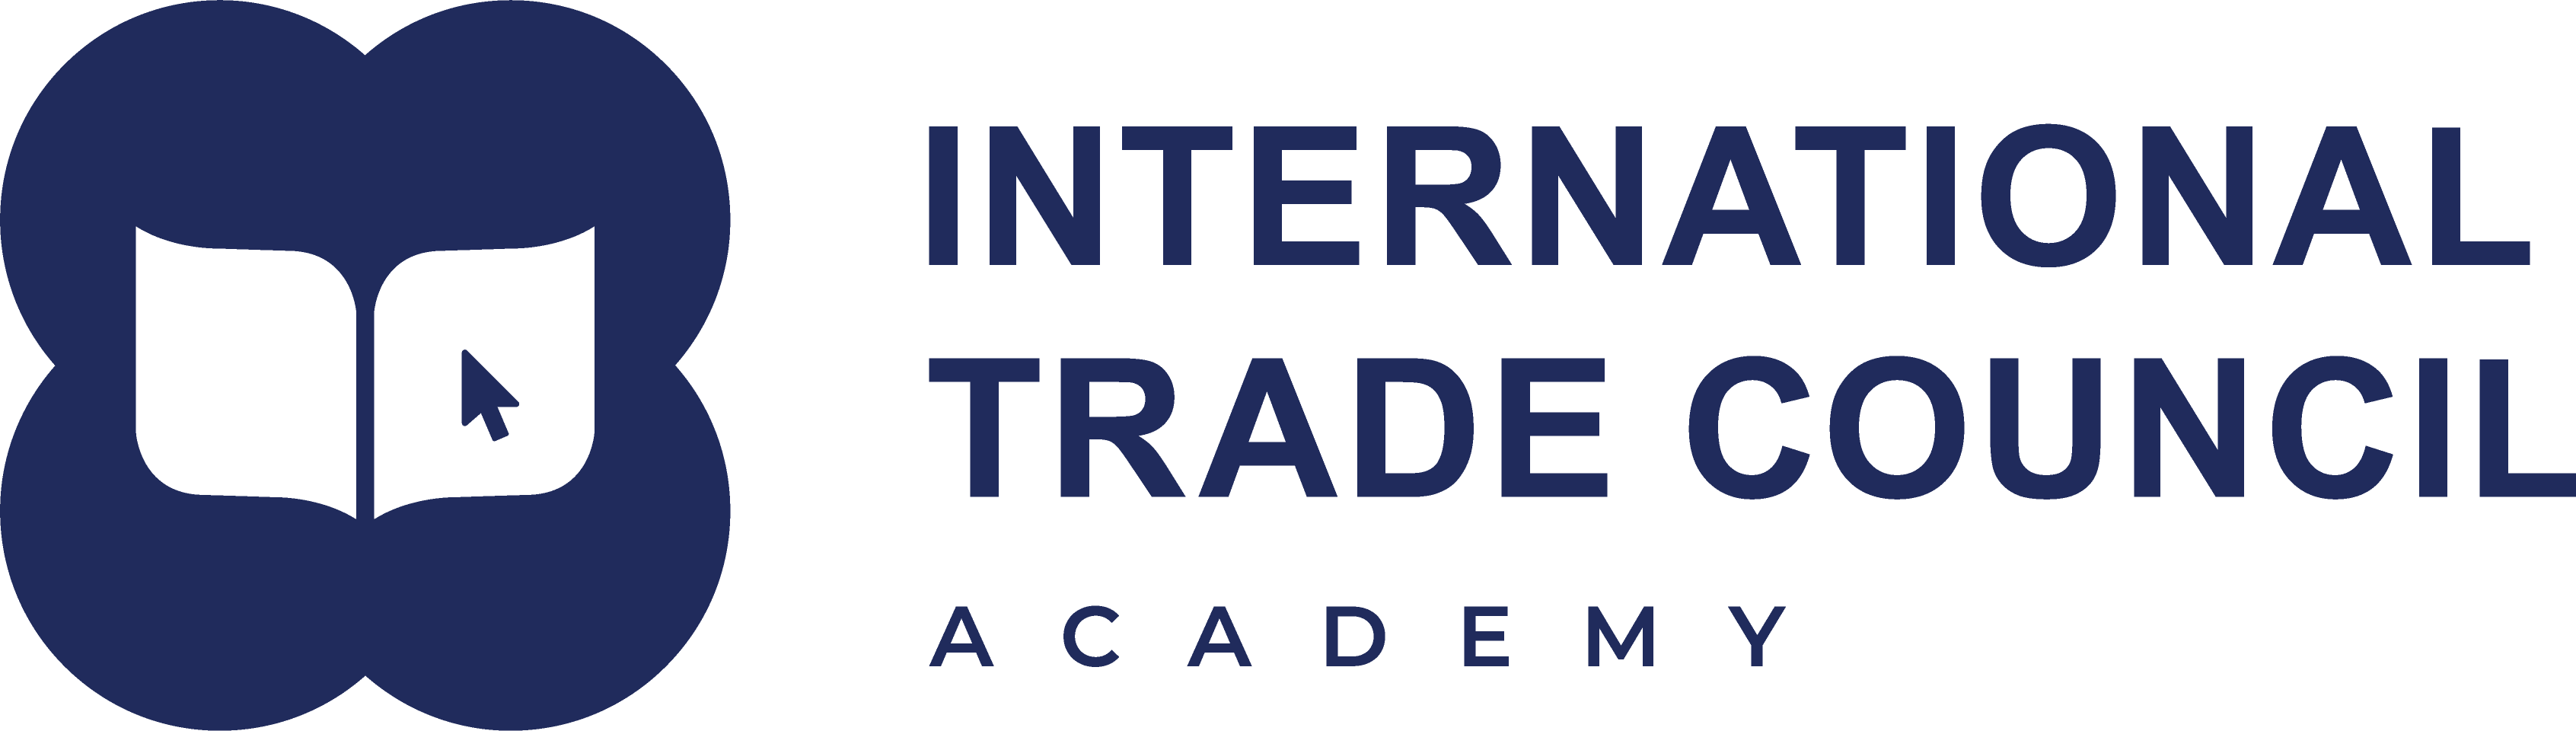 International Trade Council Unveils Academy Offering Free Online Courses and Certifications